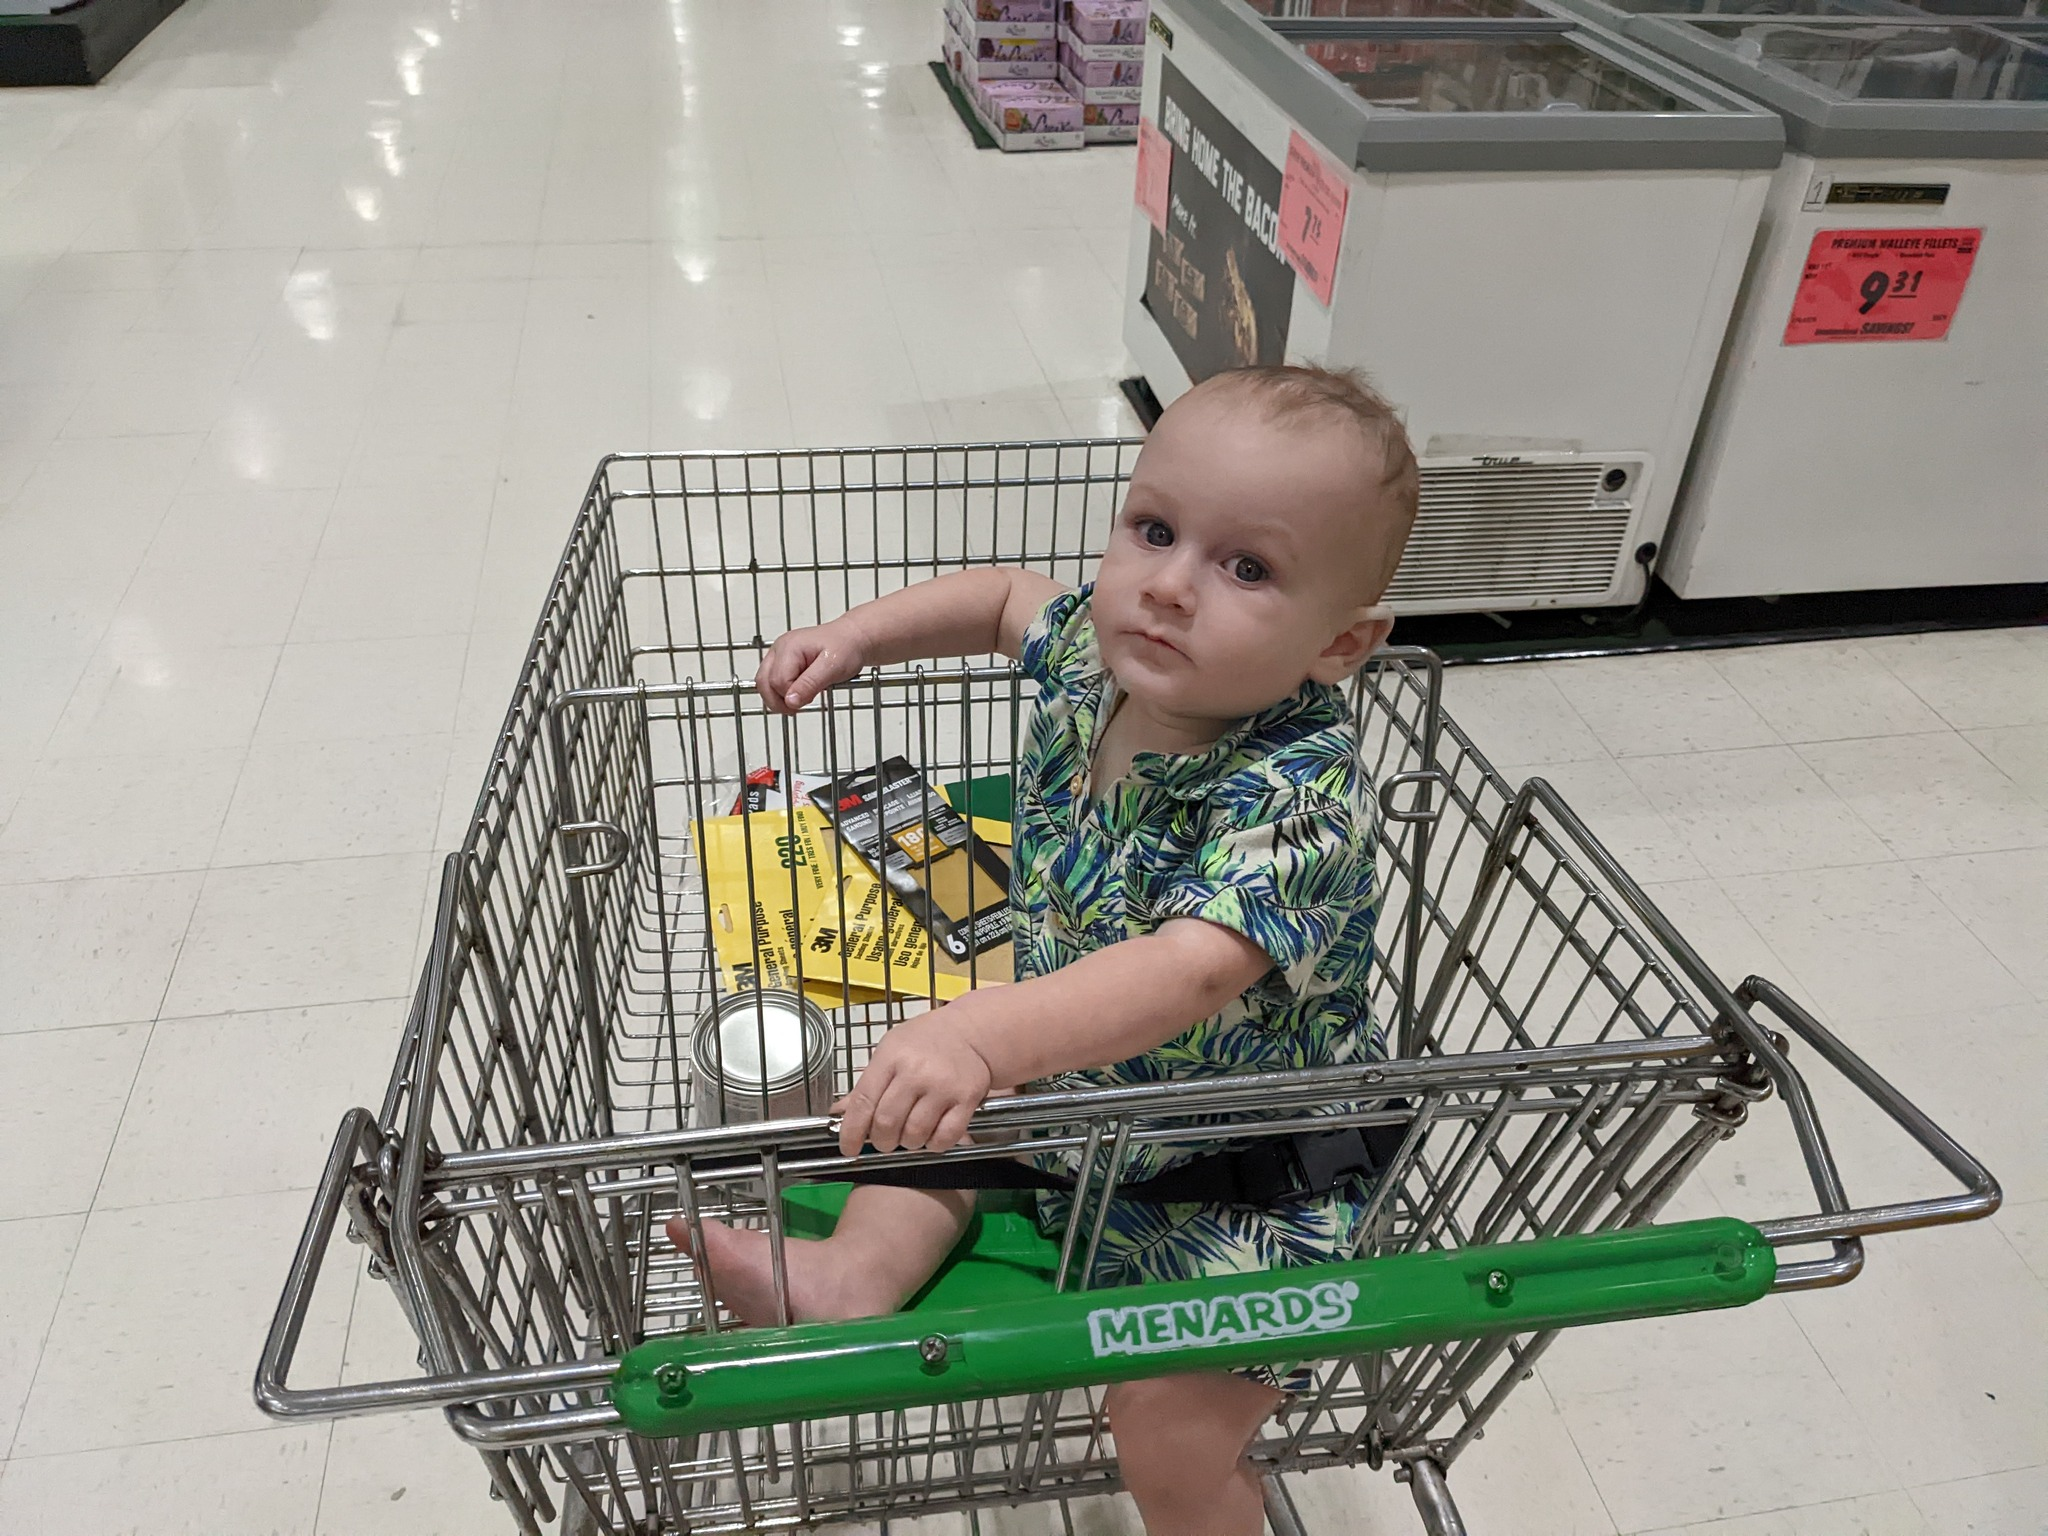 Kid sitting back in a shopping cart